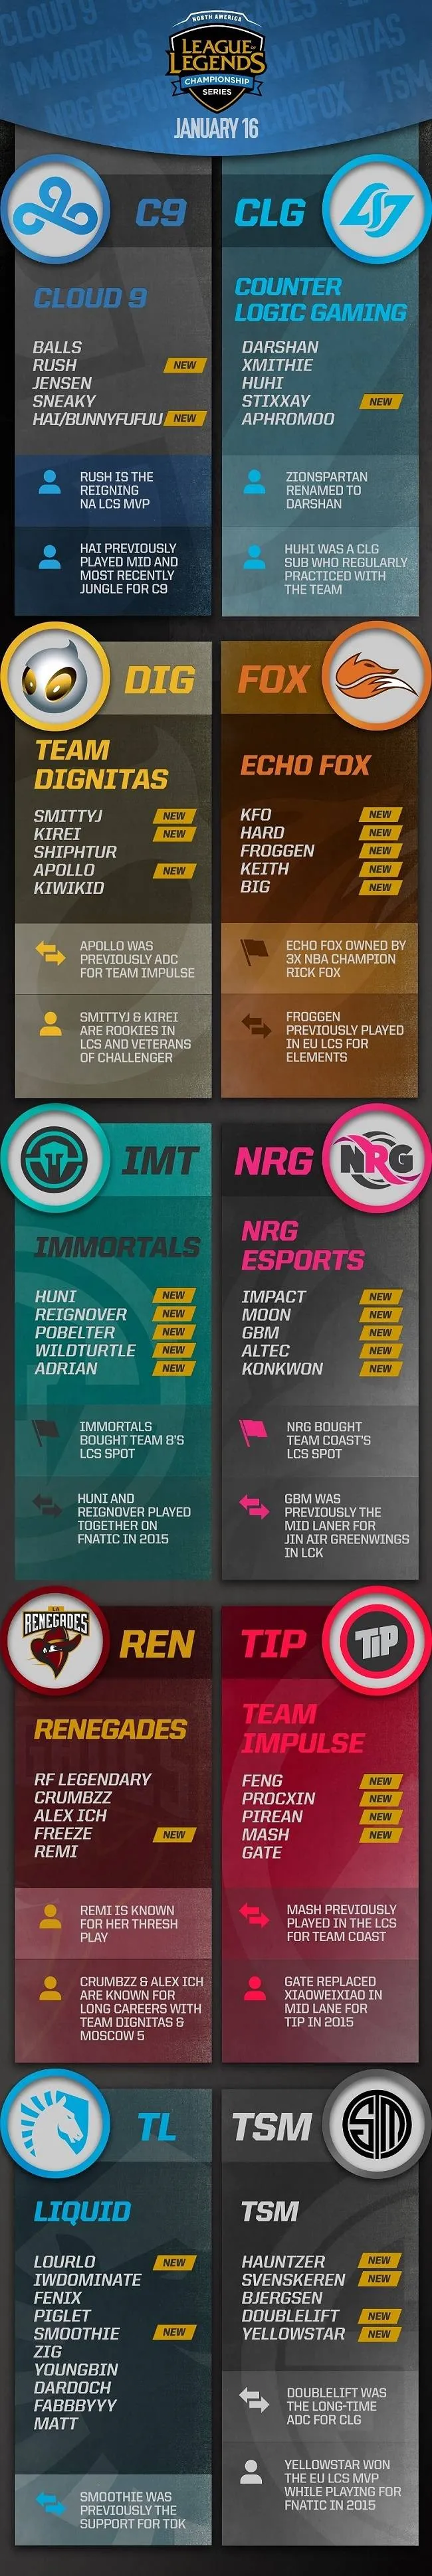 na_infographic1